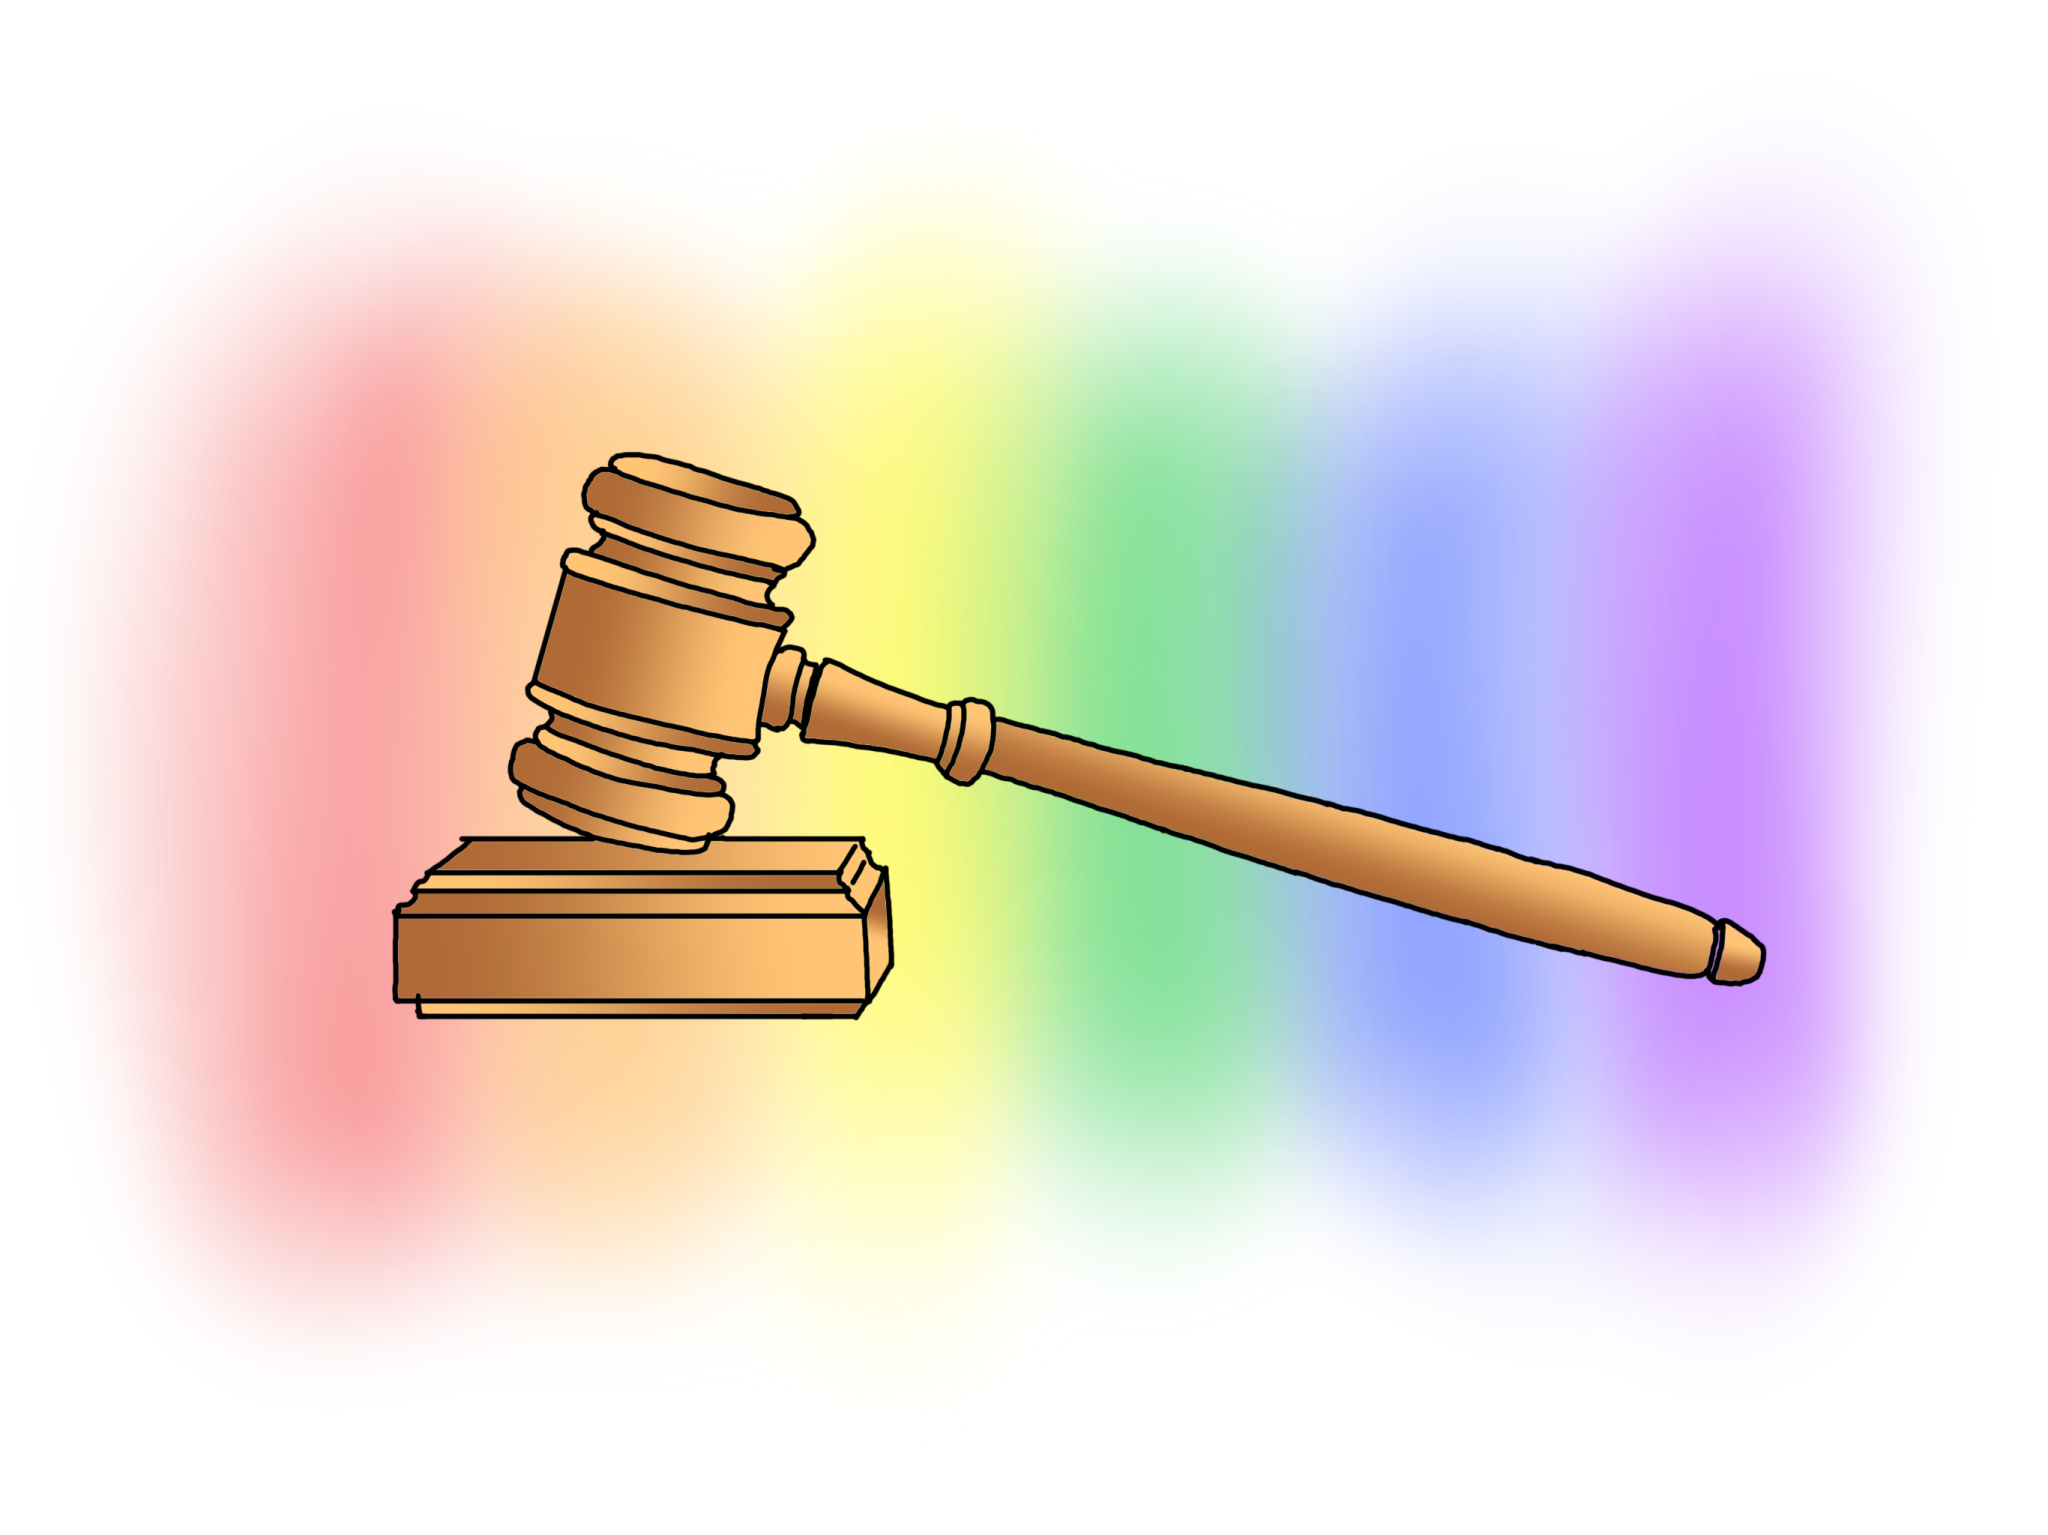 An illustration of a judge's gavel in front of a rainbow